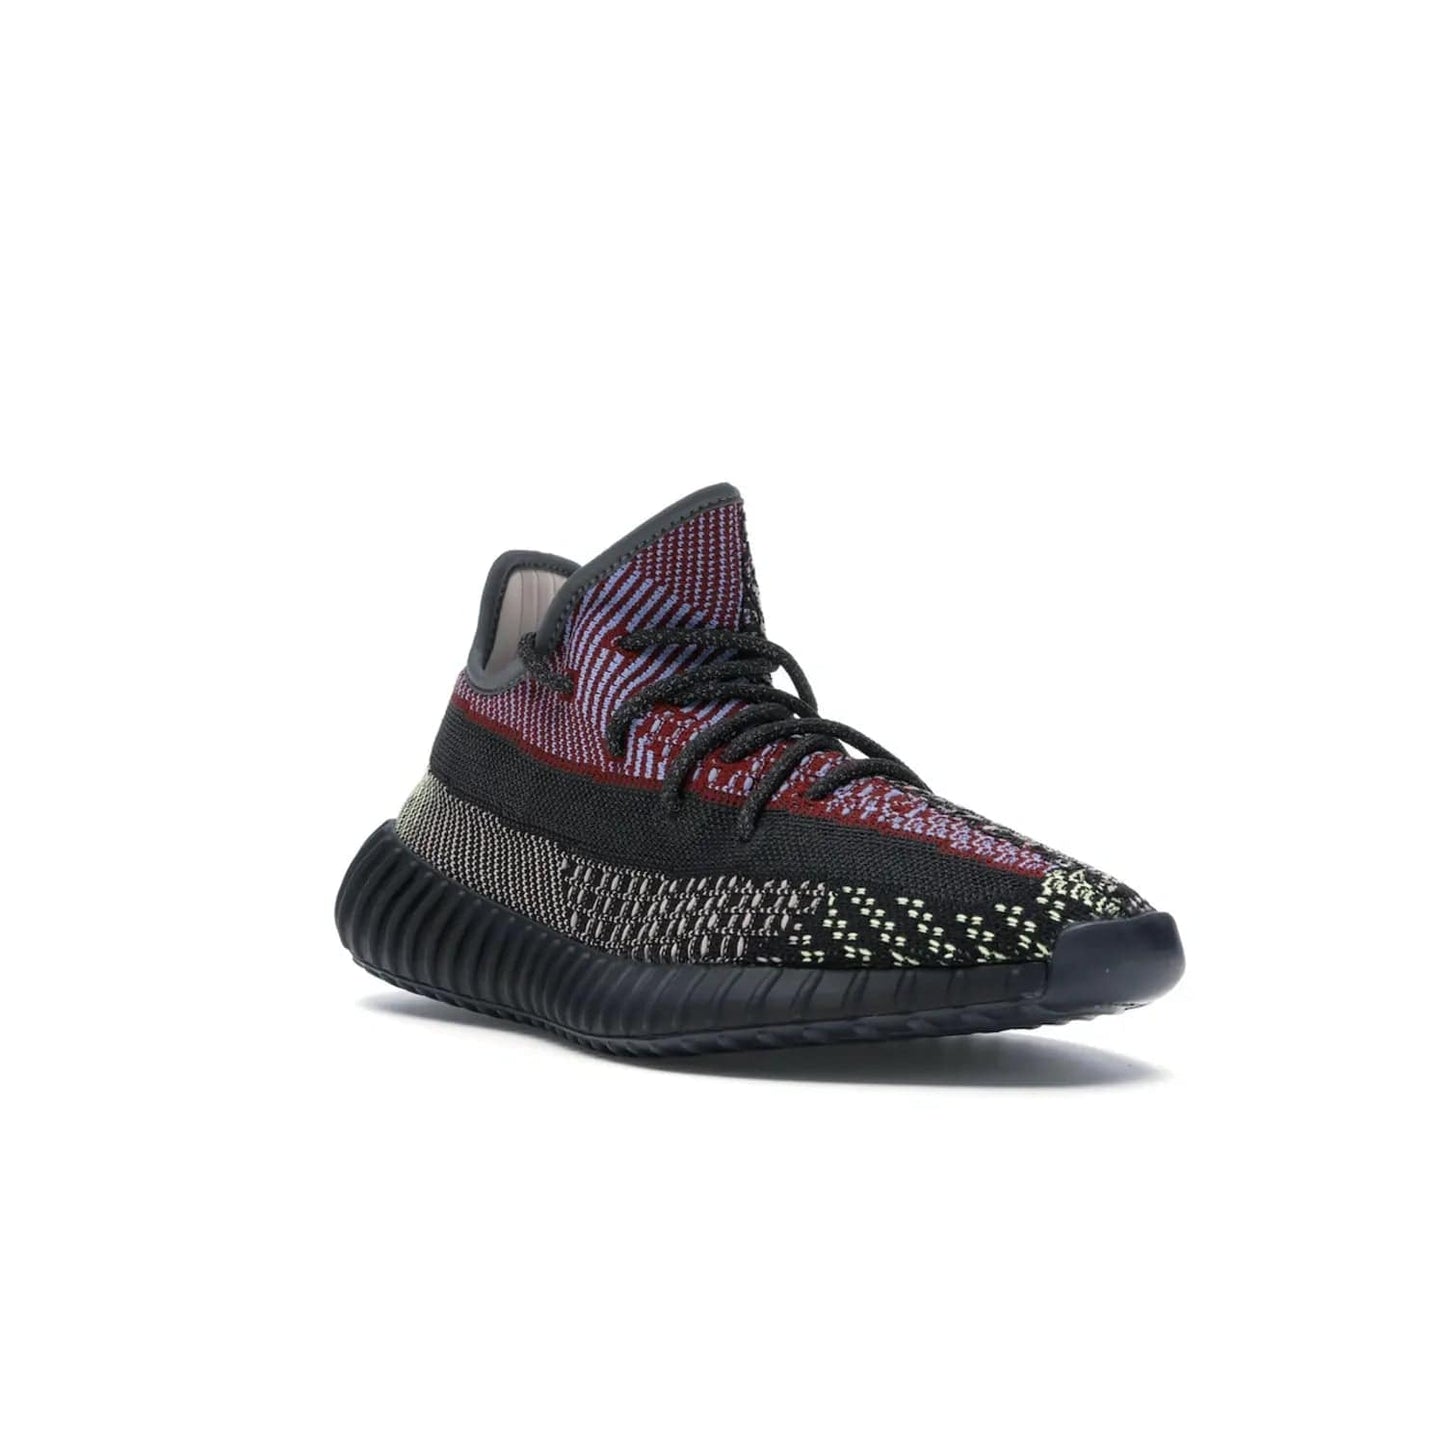 adidas Yeezy Boost 350 V2 Yecheil (Non-Reflective) - Image 6 - Only at www.BallersClubKickz.com - Make a statement with the eye-catching adidas Yeezy Boost 350 V2 Yecheil Non-Reflective. Featuring a spectrum of colorful hues, black upper, Boost cushioning, and black side stripe, the sneaker brings a luxe yet playful finish to any outfit.